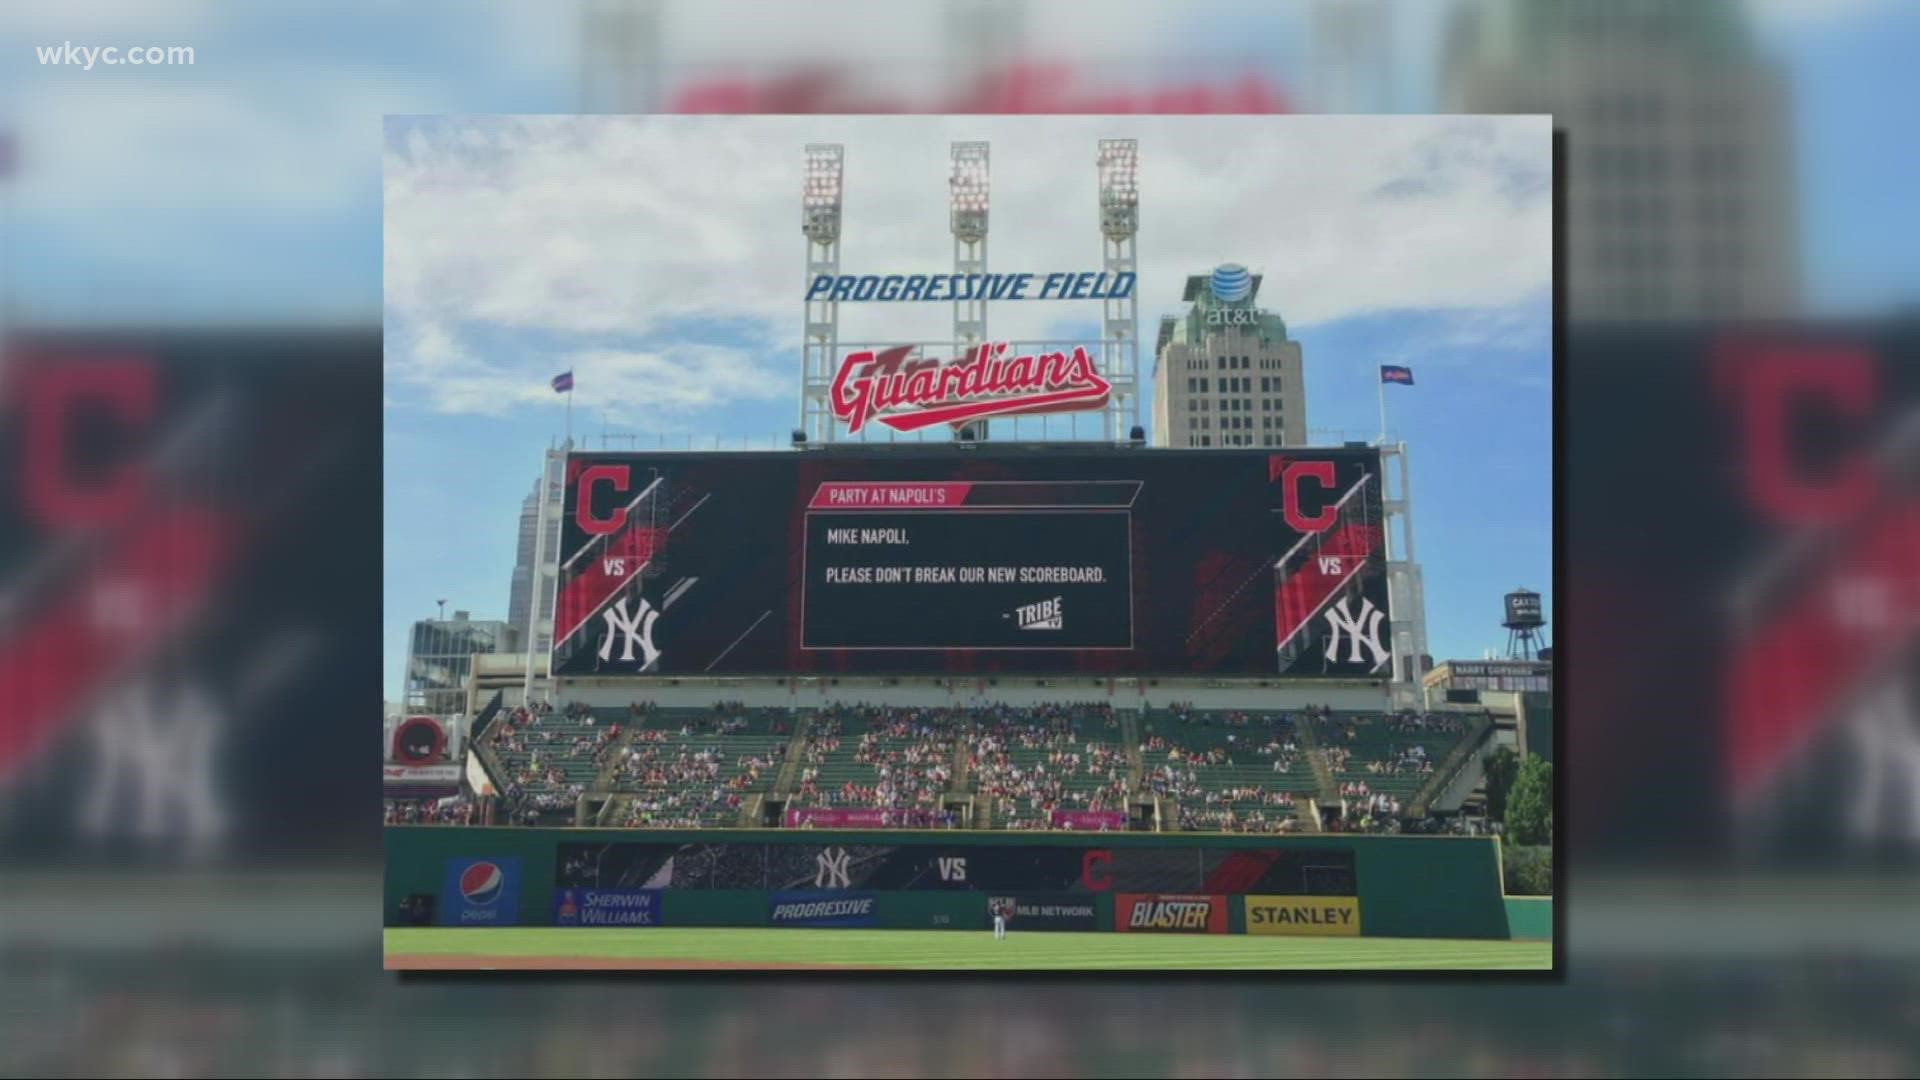 Today, we learned more about what to expect progressive field to look like next season.